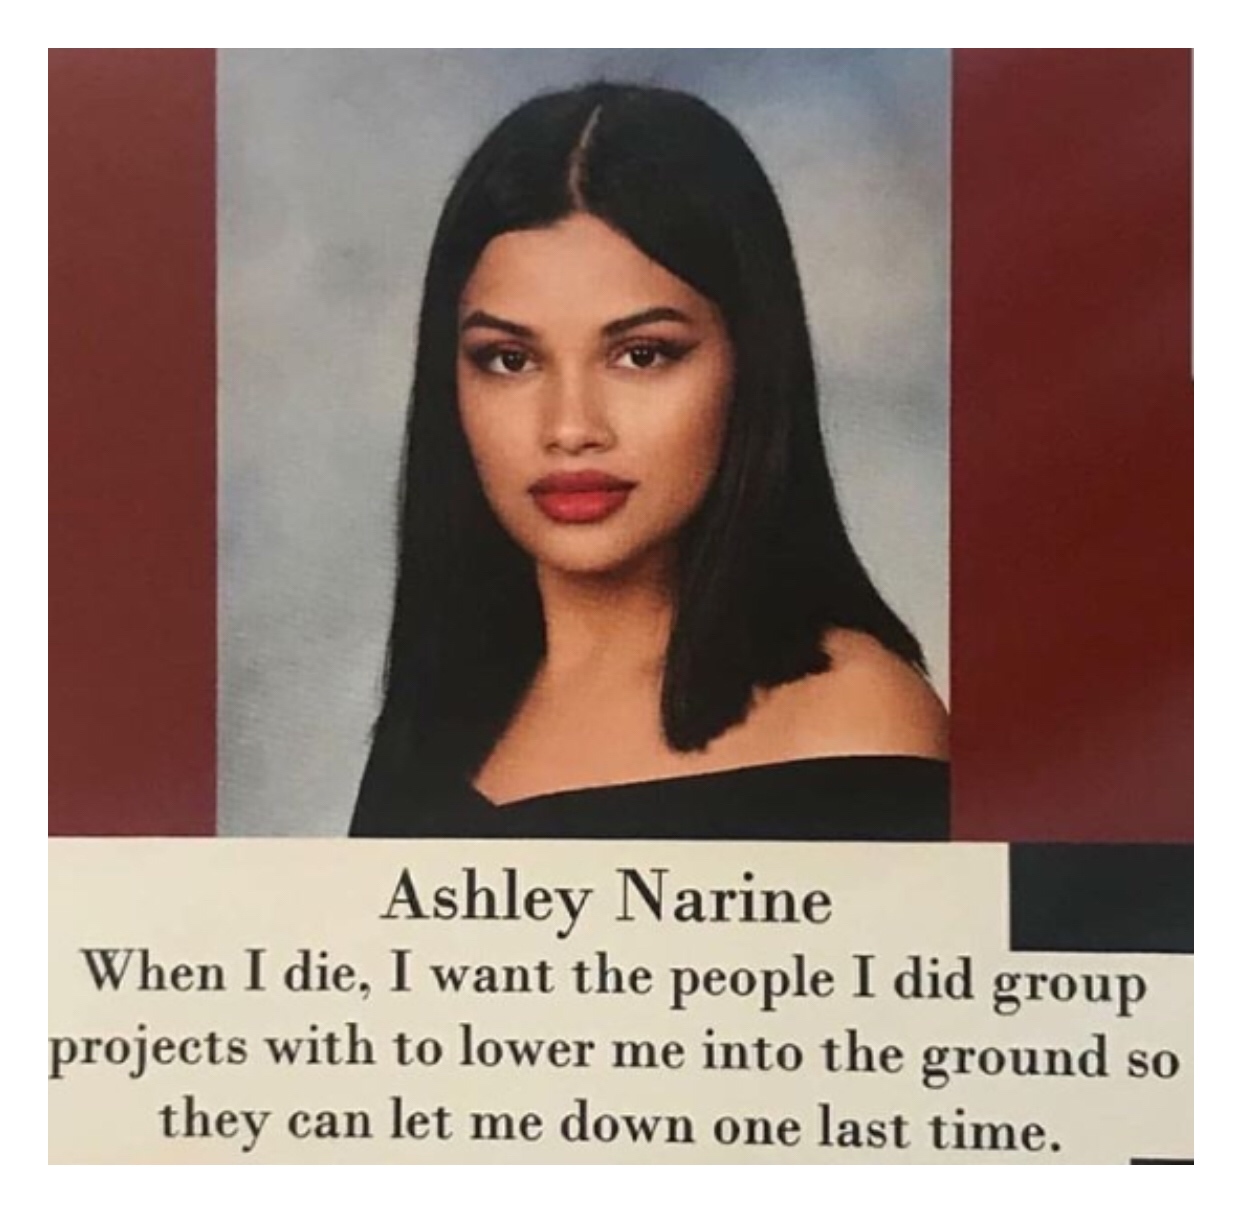 let me down one last time meme - Ashley Narine When I die, I want the people I did group projects with to lower me into the ground so they can let me down one last time.